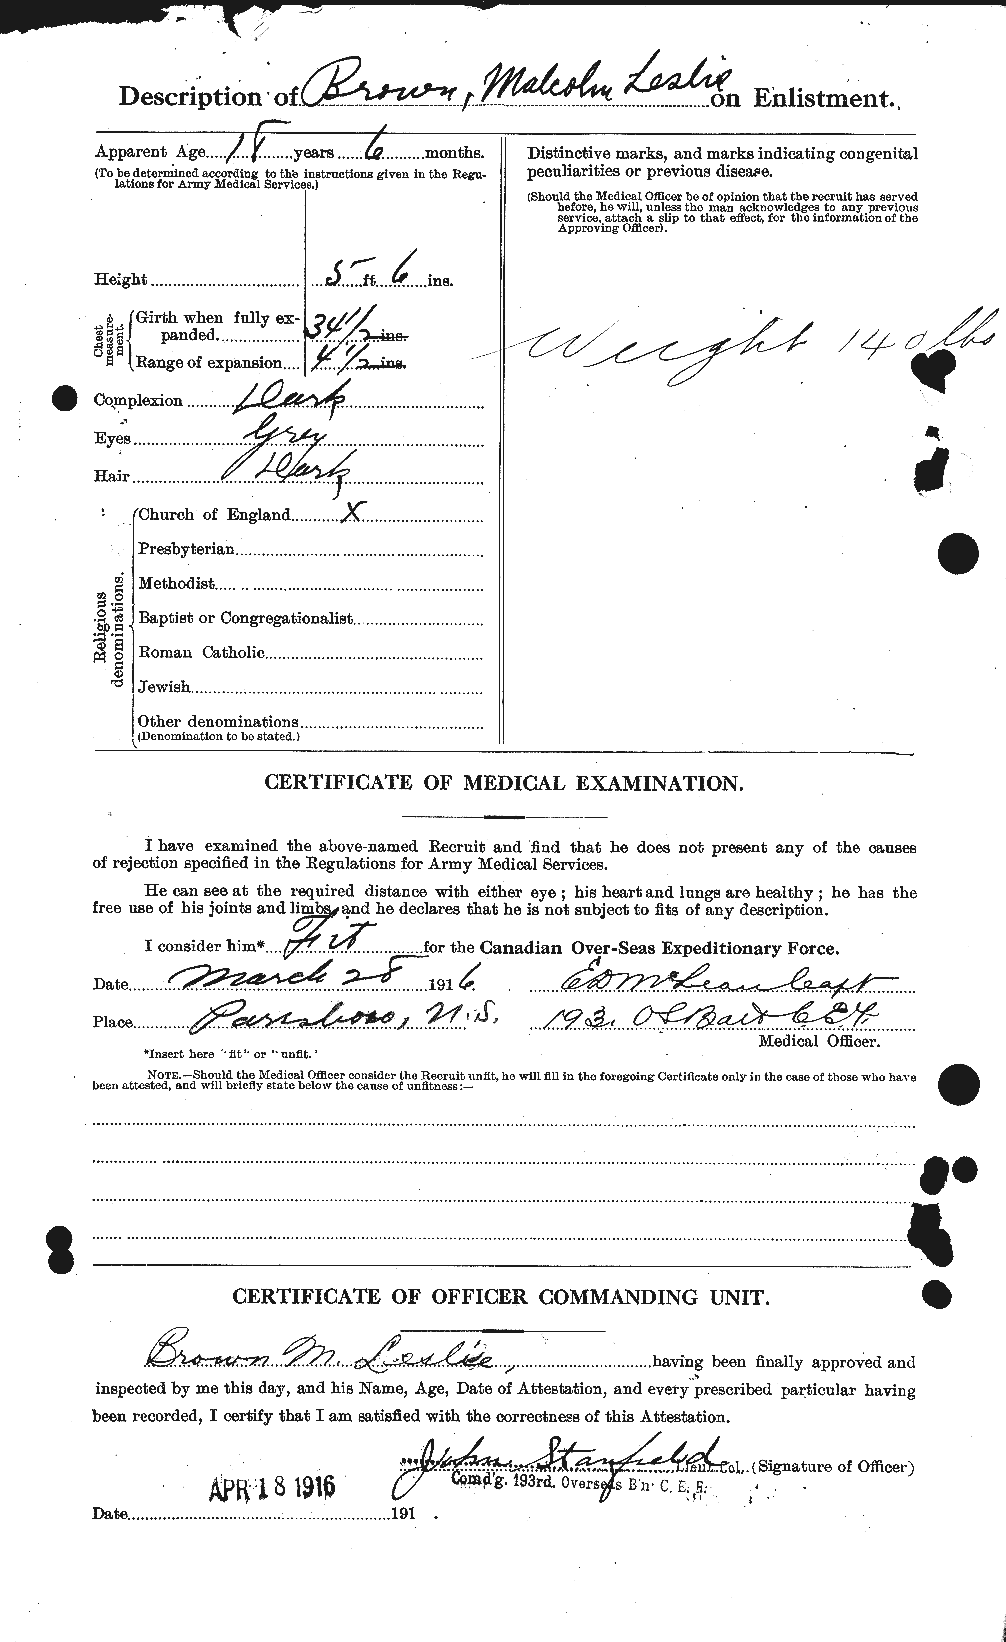 Personnel Records of the First World War - CEF 266355b